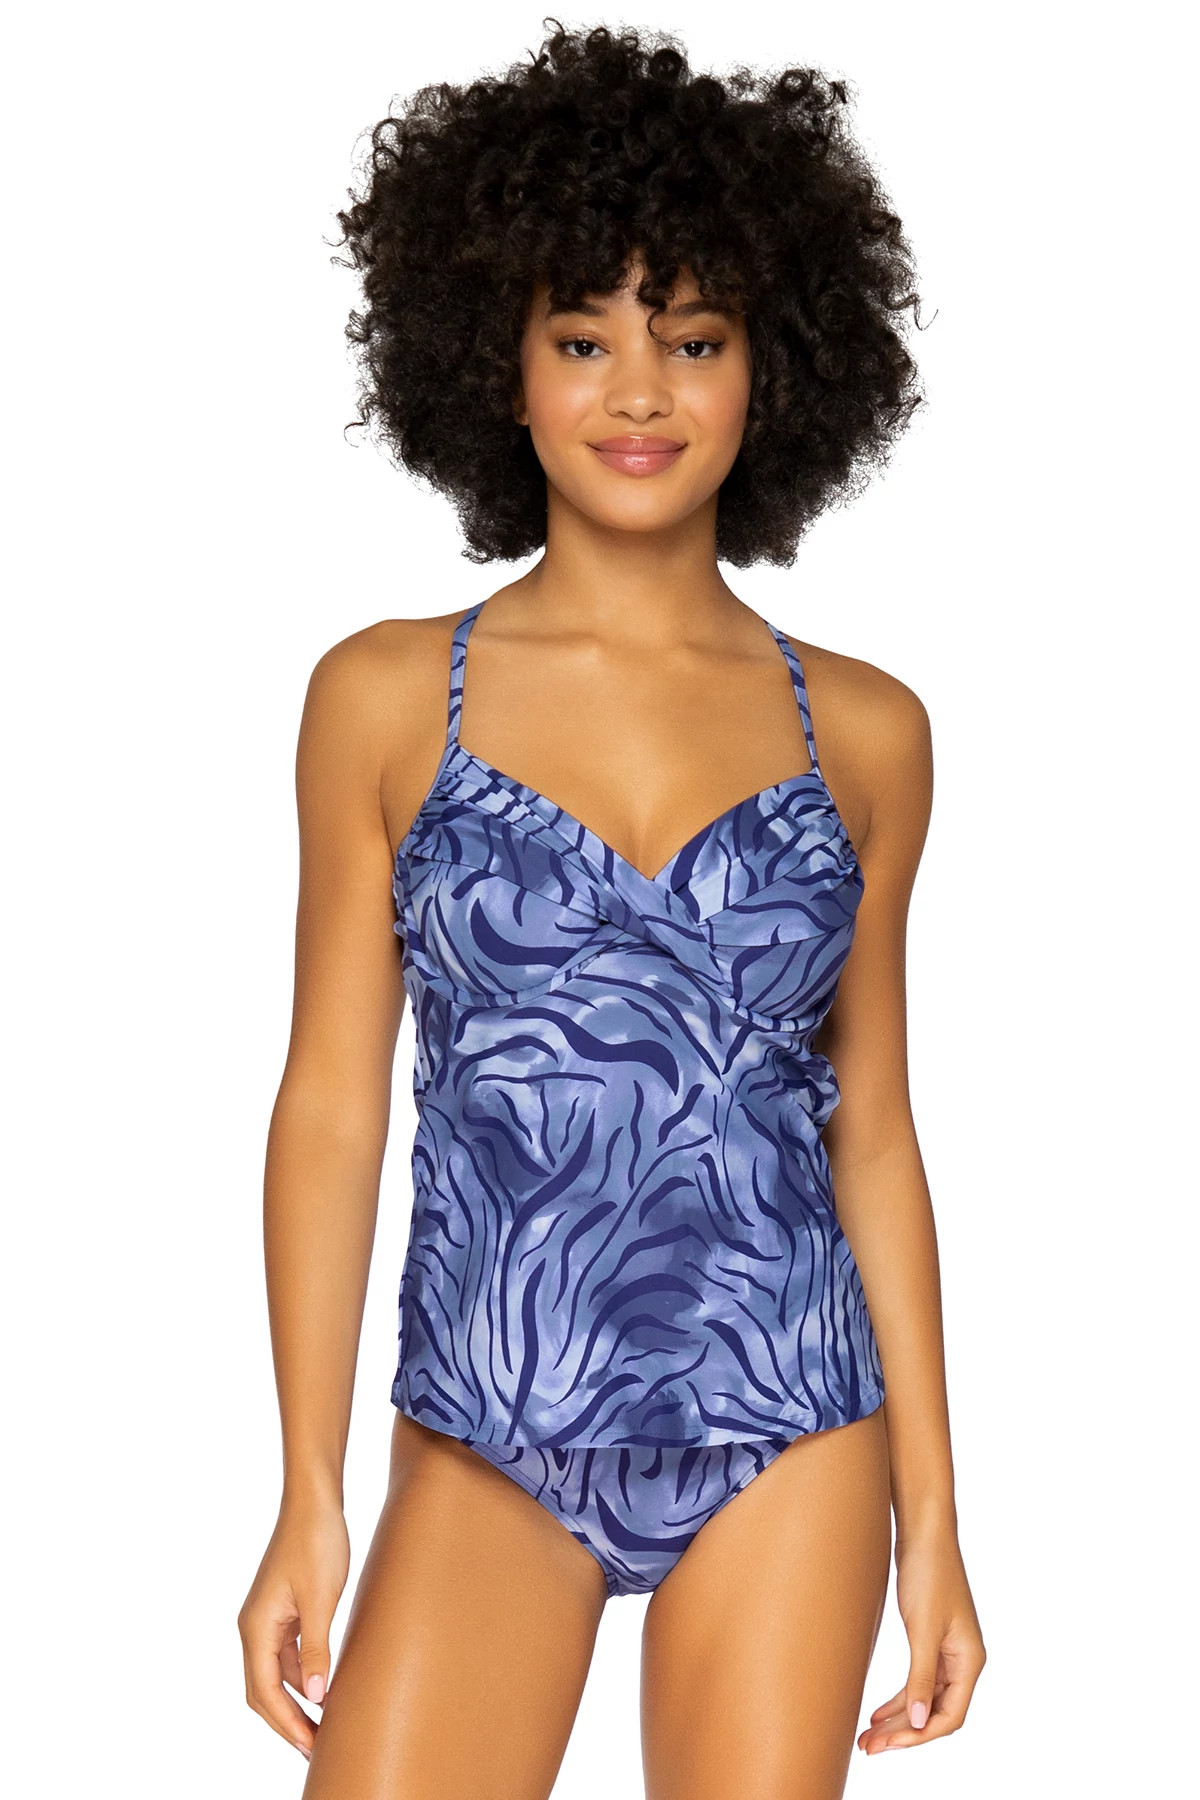 SUMATRA Crossroads Over The Shoulder Tankini Top (E-H Cup) image number 1